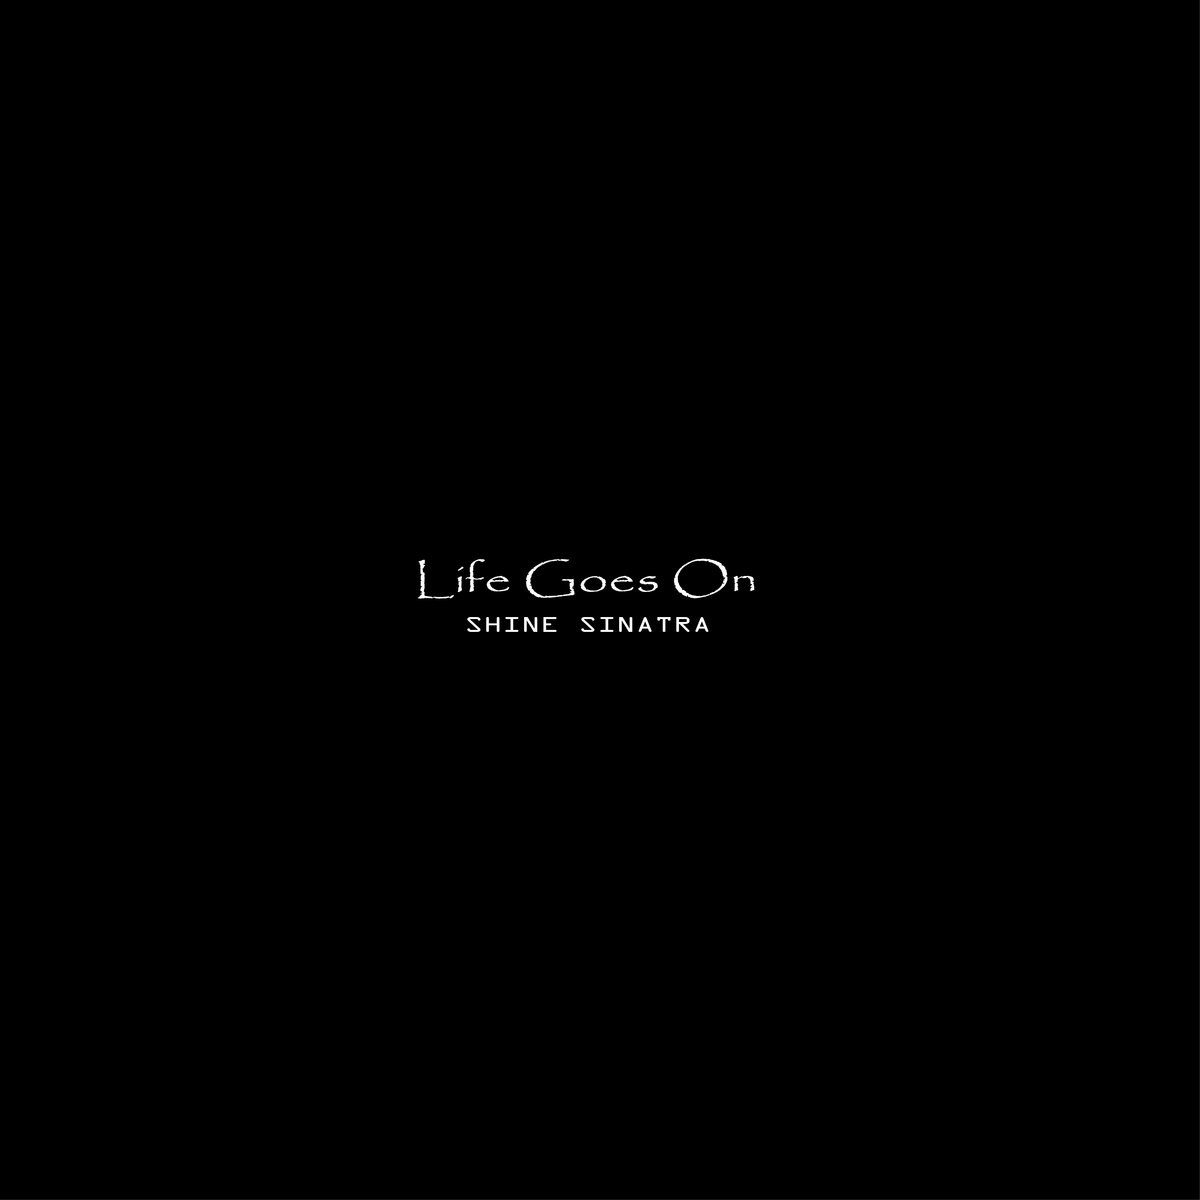 HQ Life Goes On Wallpapers | File 25.56Kb